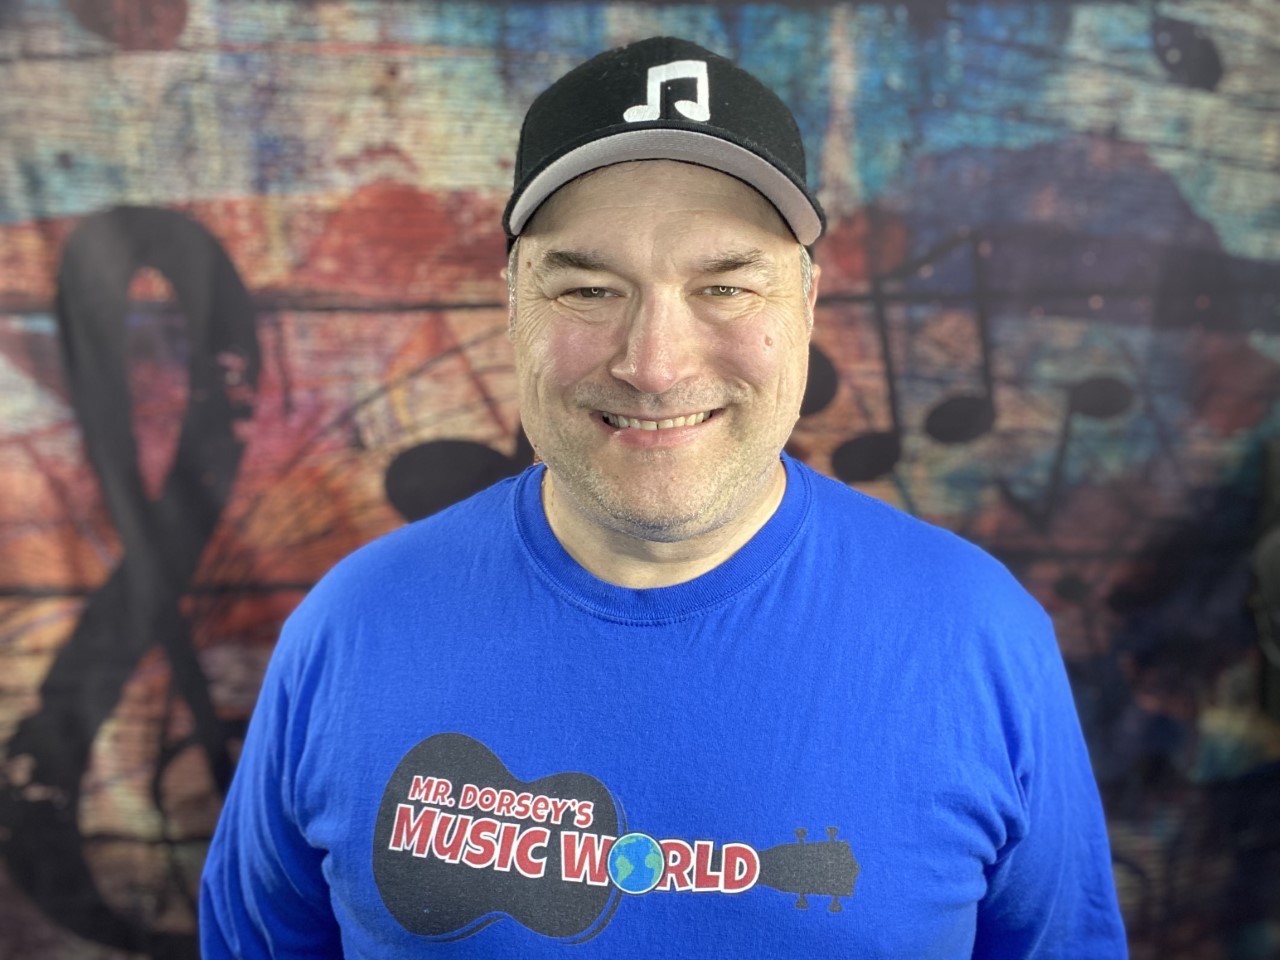 This is a photo of Seymour music teacher Kevin Dorsey, wearing a blue tshirt and black hat with a musical note on it, smiling at the camera.